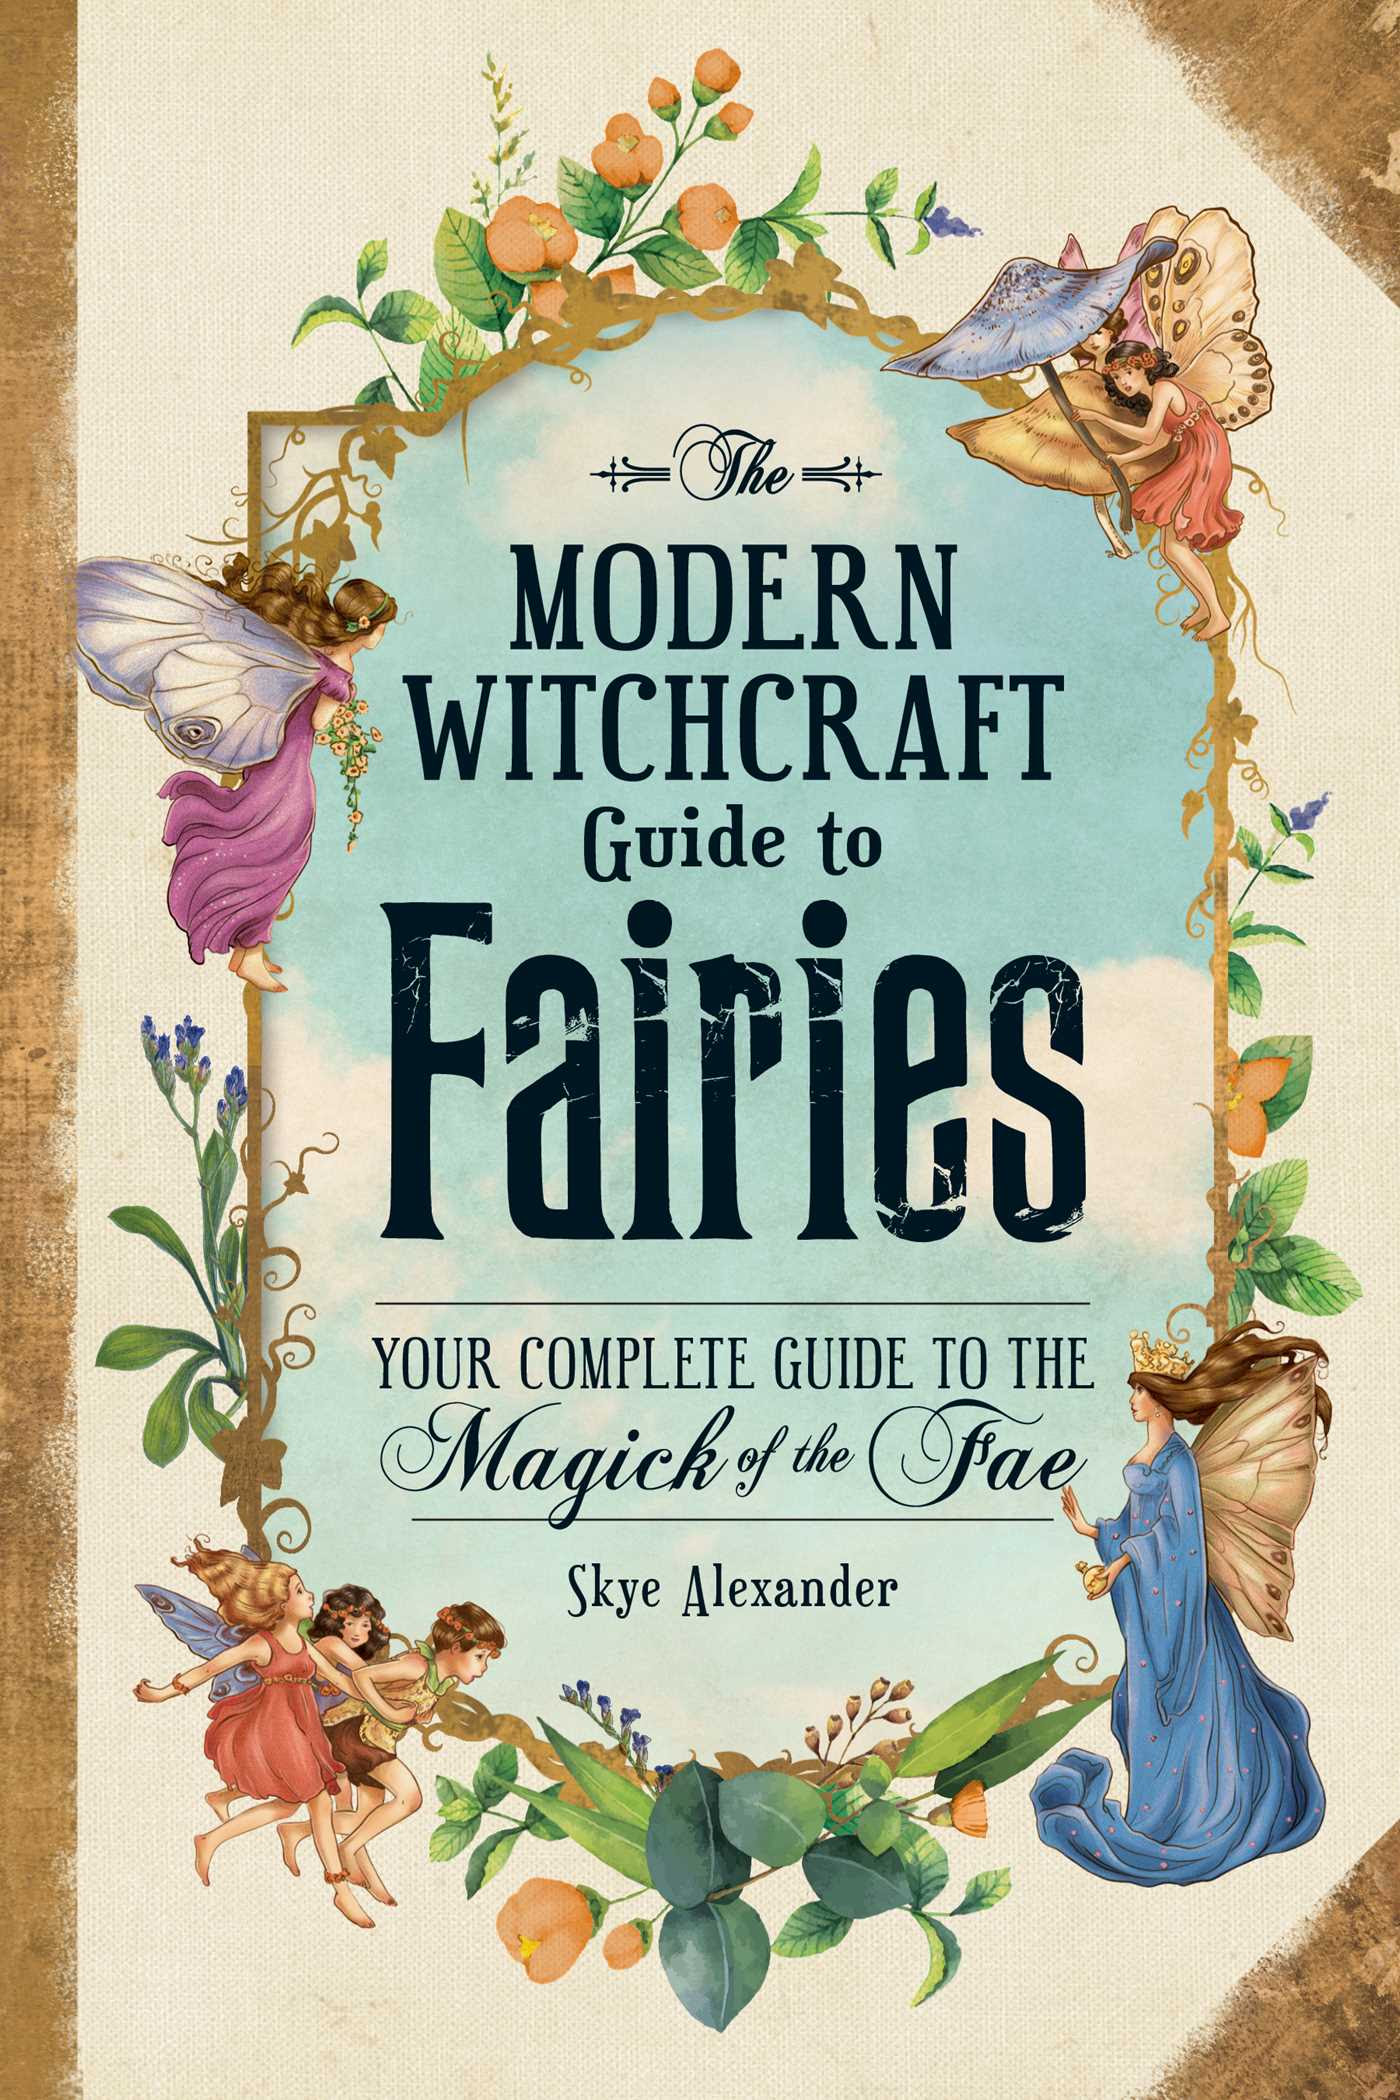 The Modern Witchcraft Guide to Fairies: Your Complete Guide to the Magick of the Fae PDF